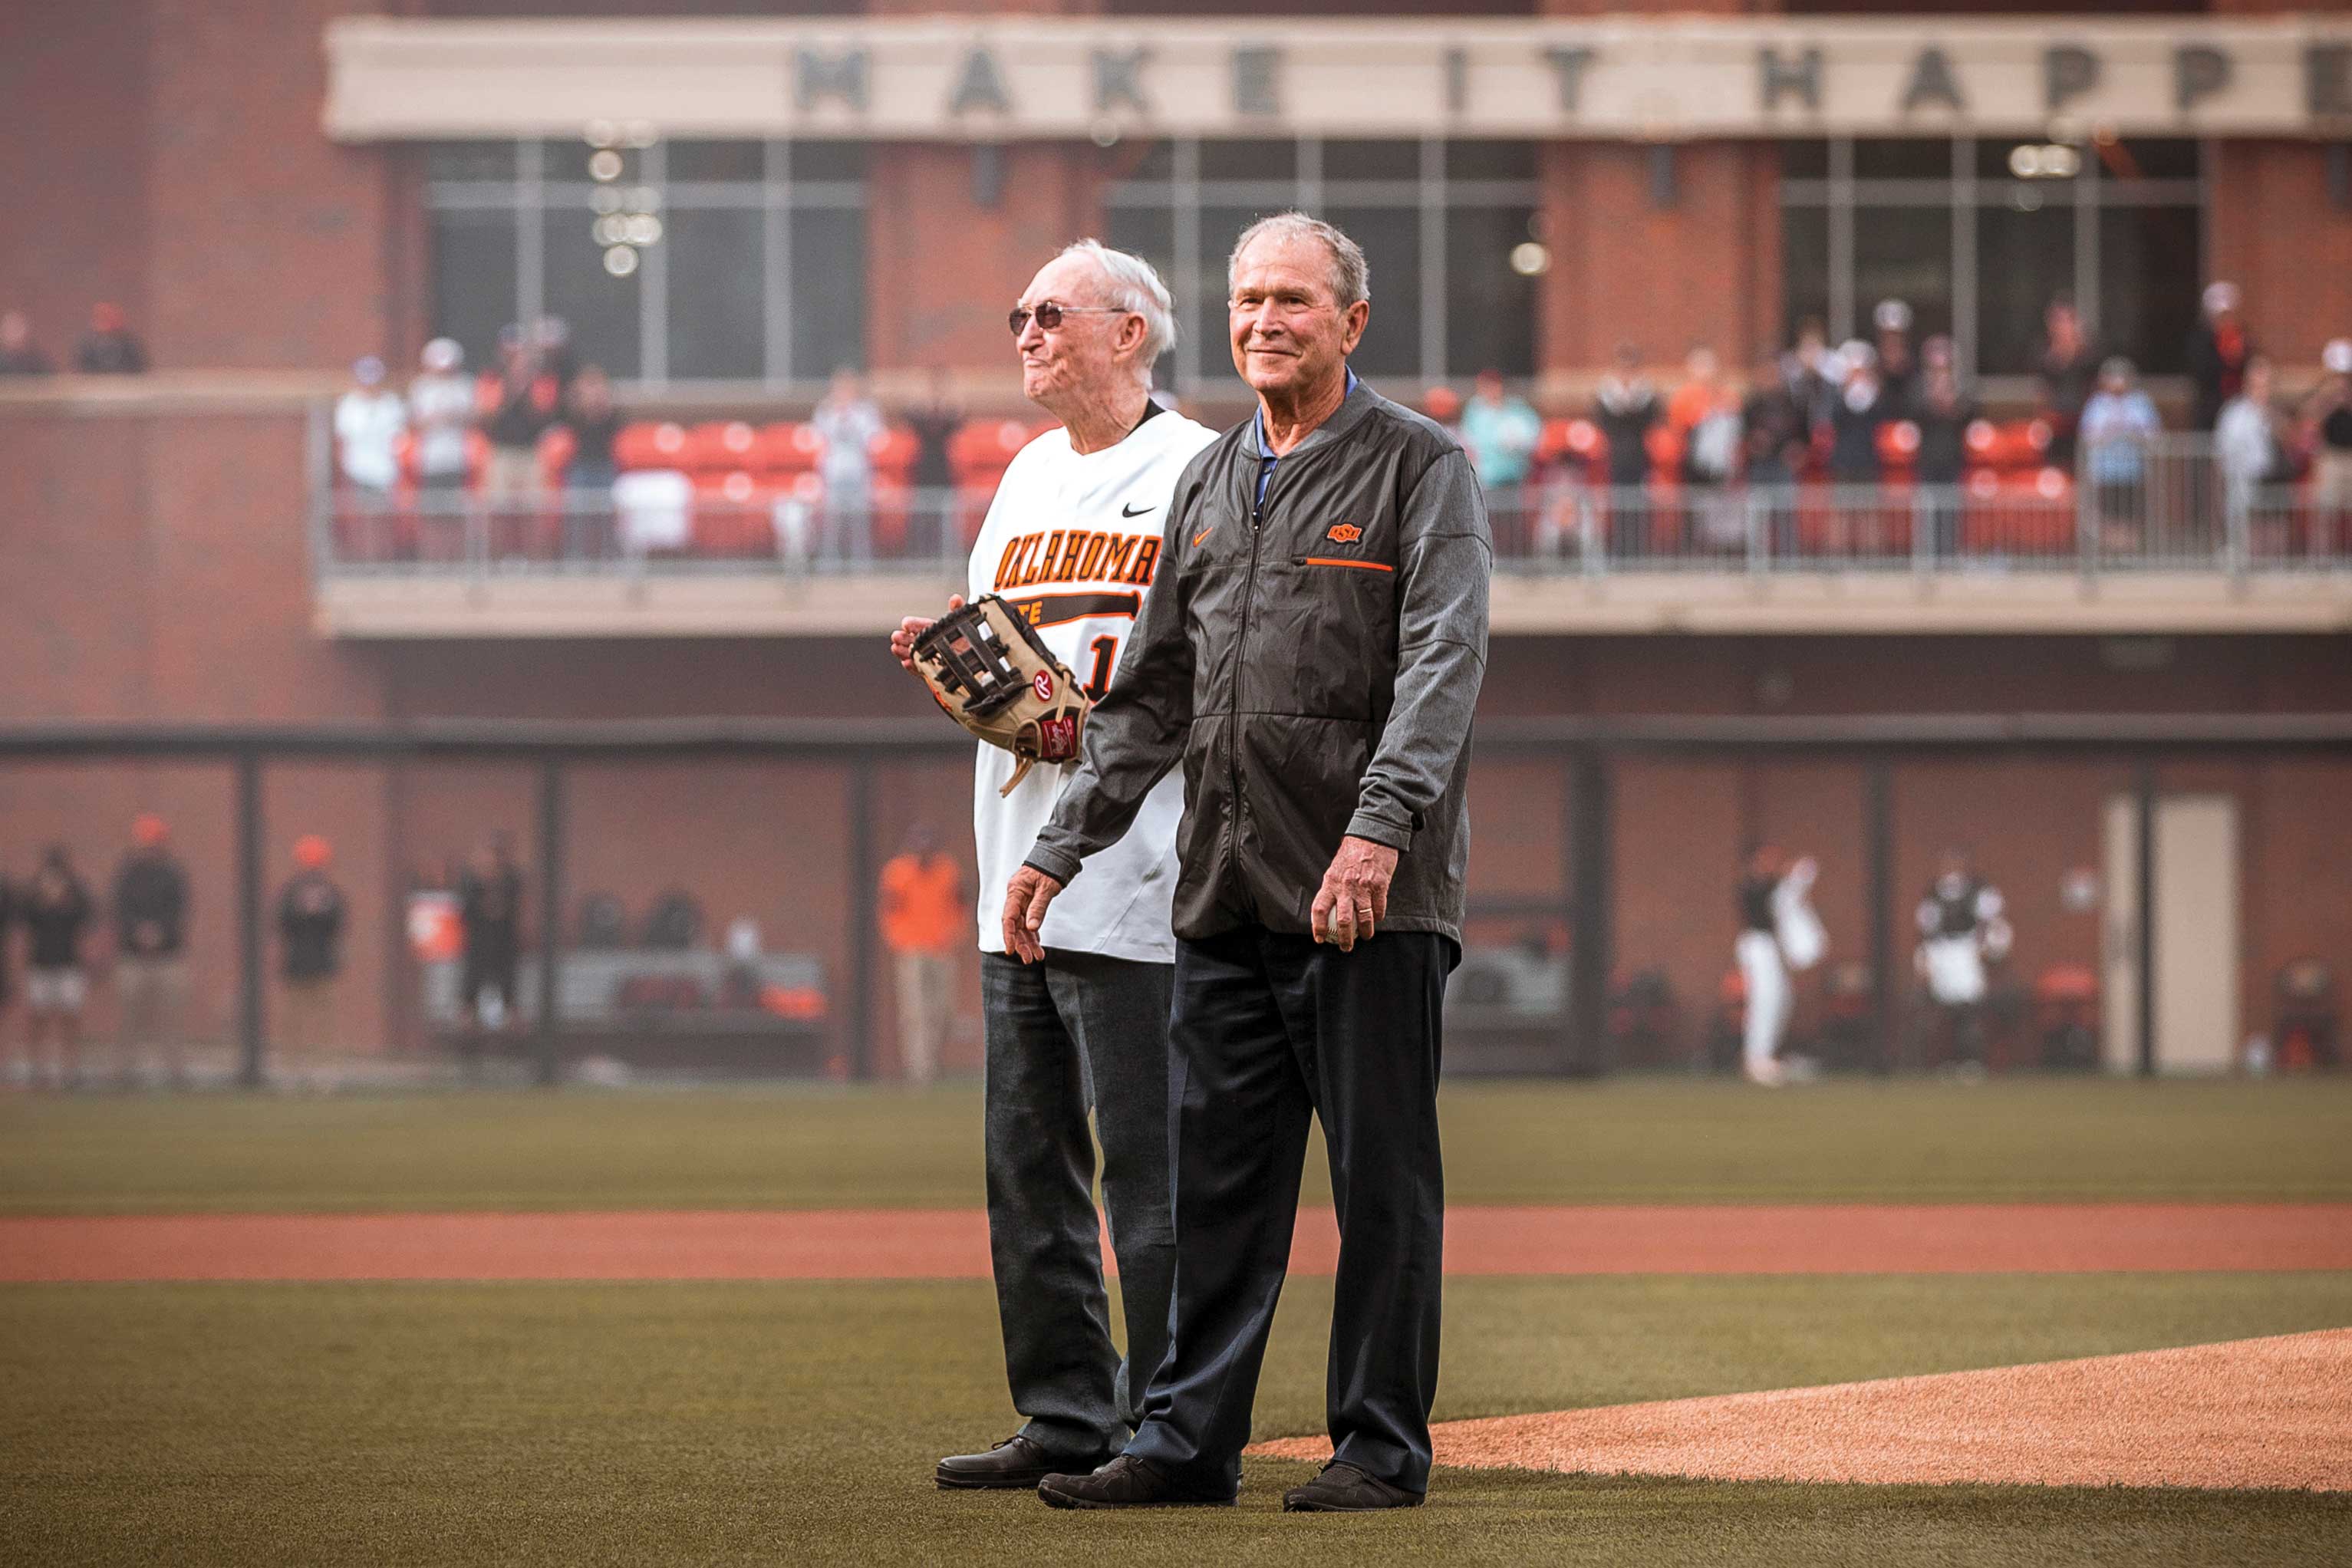 Cecil O’Brate and former U.S. President George W. Bush throw out the first pitch at O’Brate Stadium in 2021.